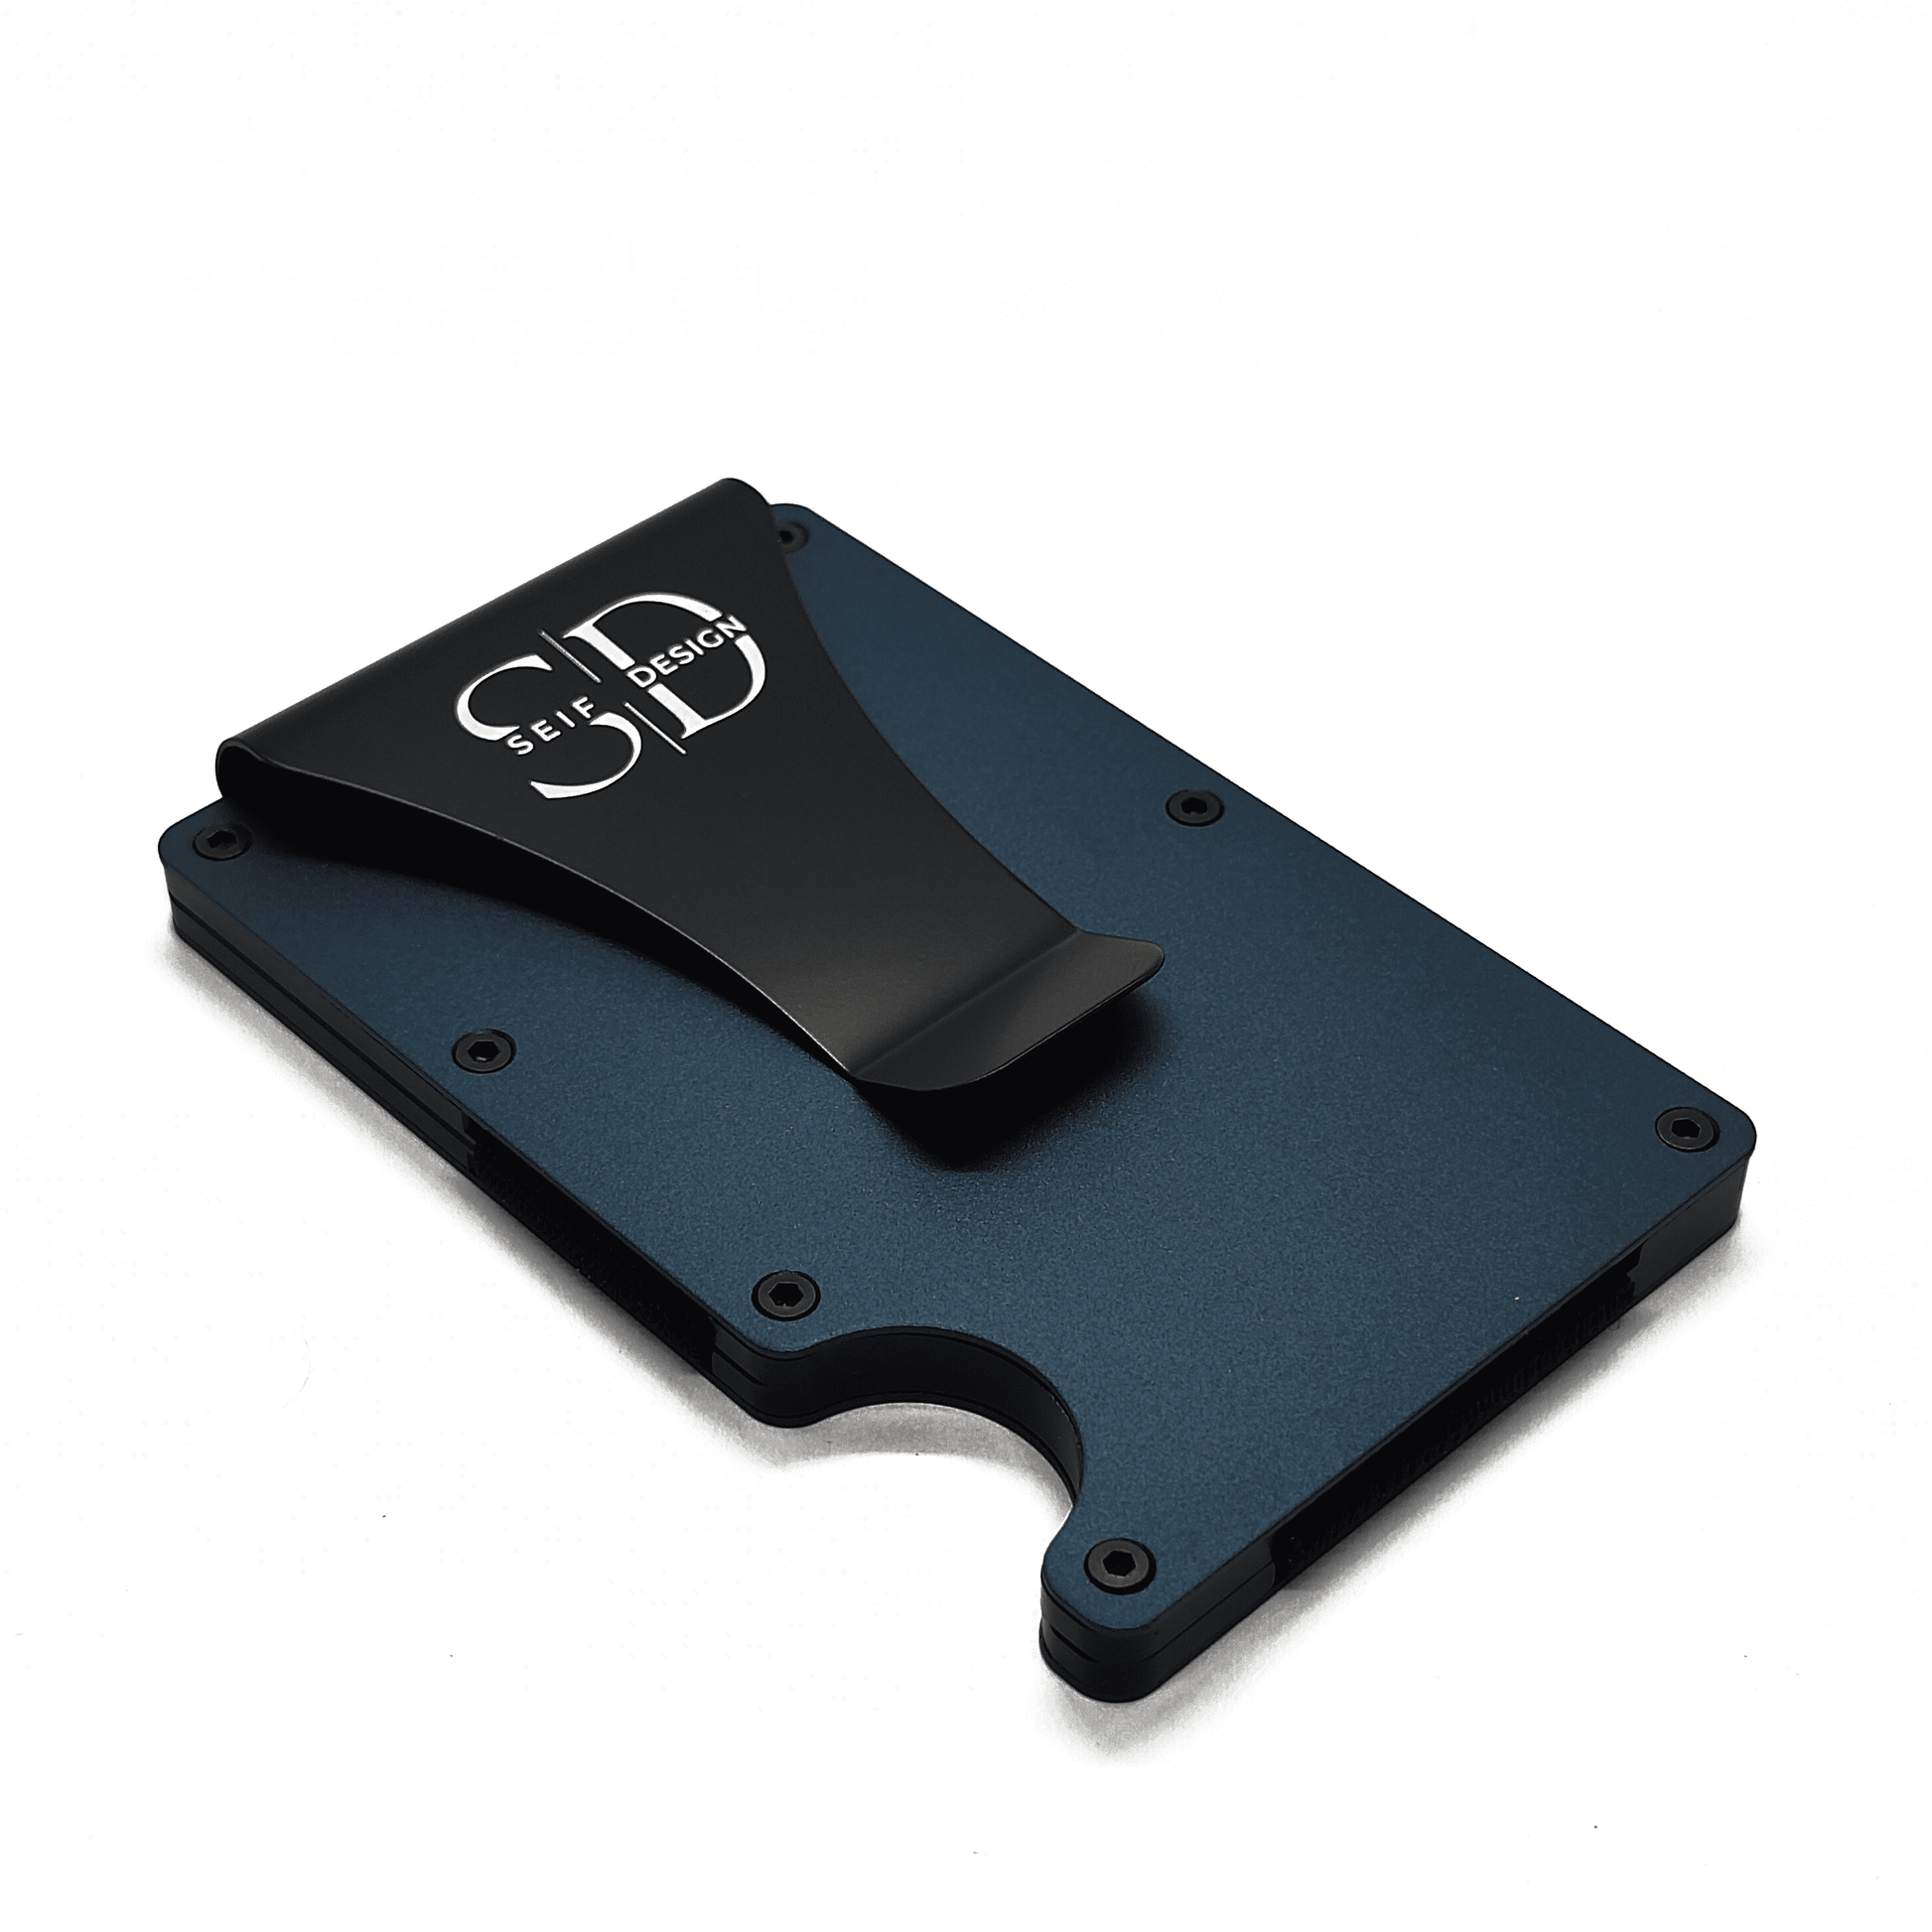 Aluminum card holder with RFID blocking, showcasing a sleek and minimalist design. Safely stores up to 12 cards while offering protection against contactless theft. Eco-friendly packaging reflects our commitment to sustainability.